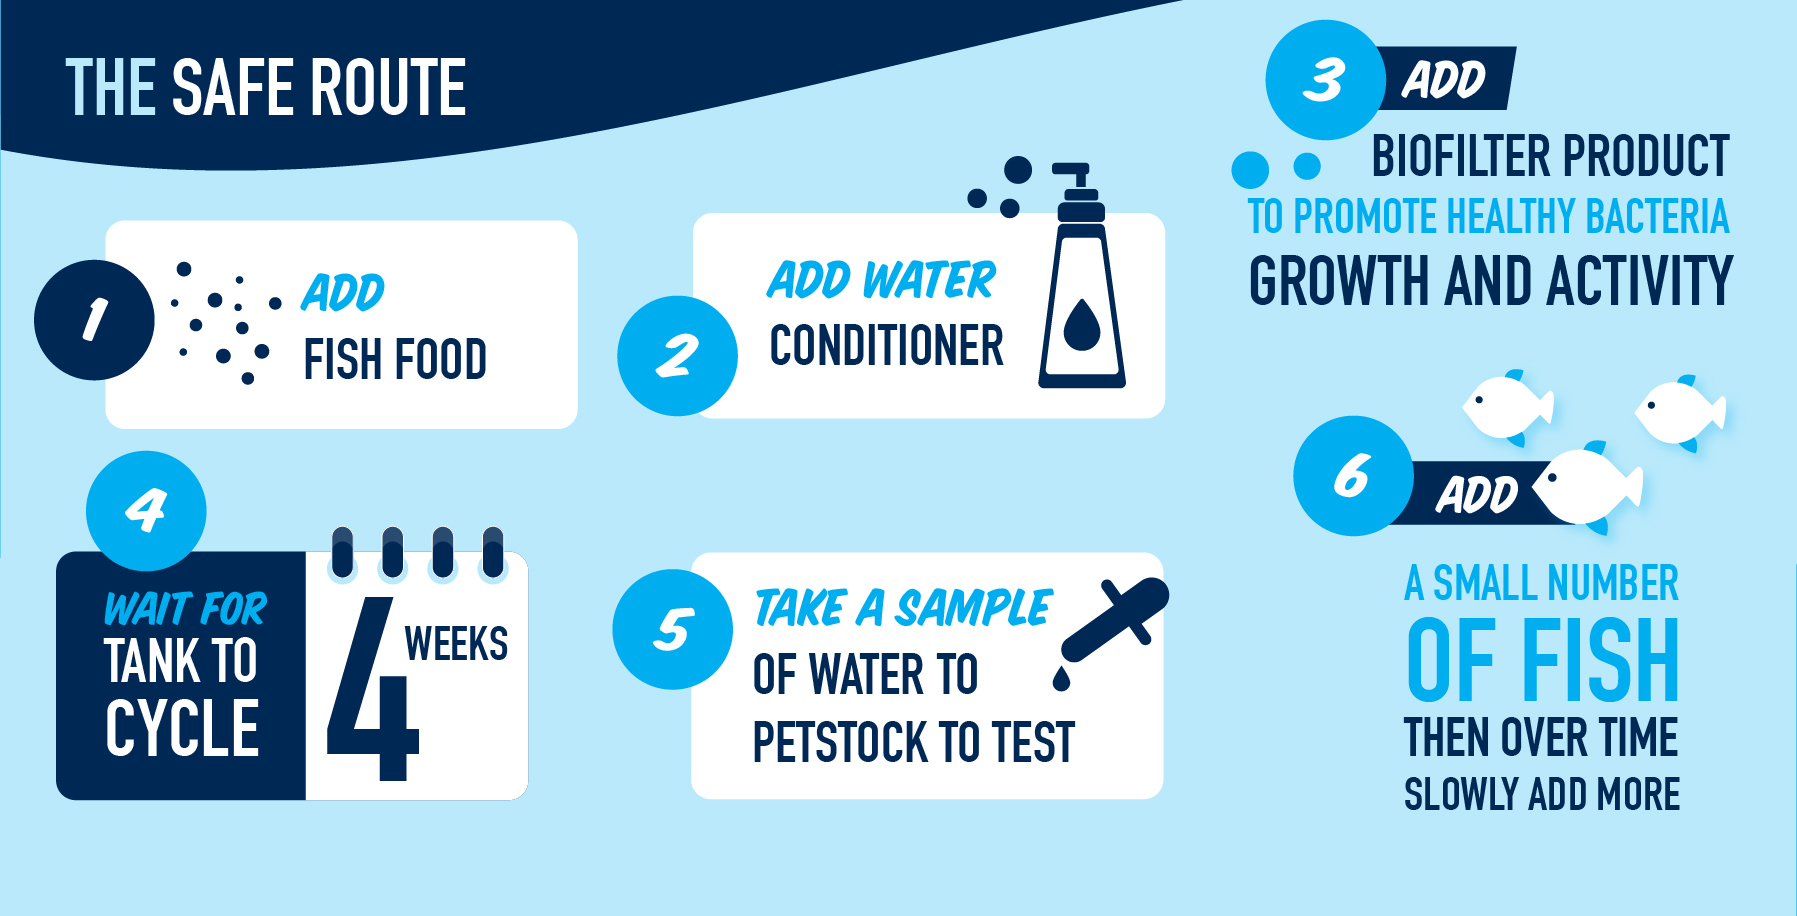 The Safe Route: 1. Add fish food. 2. Add water conditioner. 3. Add biofilter product to promote healthy bacteria growth and activity. 4. Wait 4 weeks for tank to cycle. 5. Take a sample of water to PETstock to test. 6. Add a small number of fish then over time slowly add more.